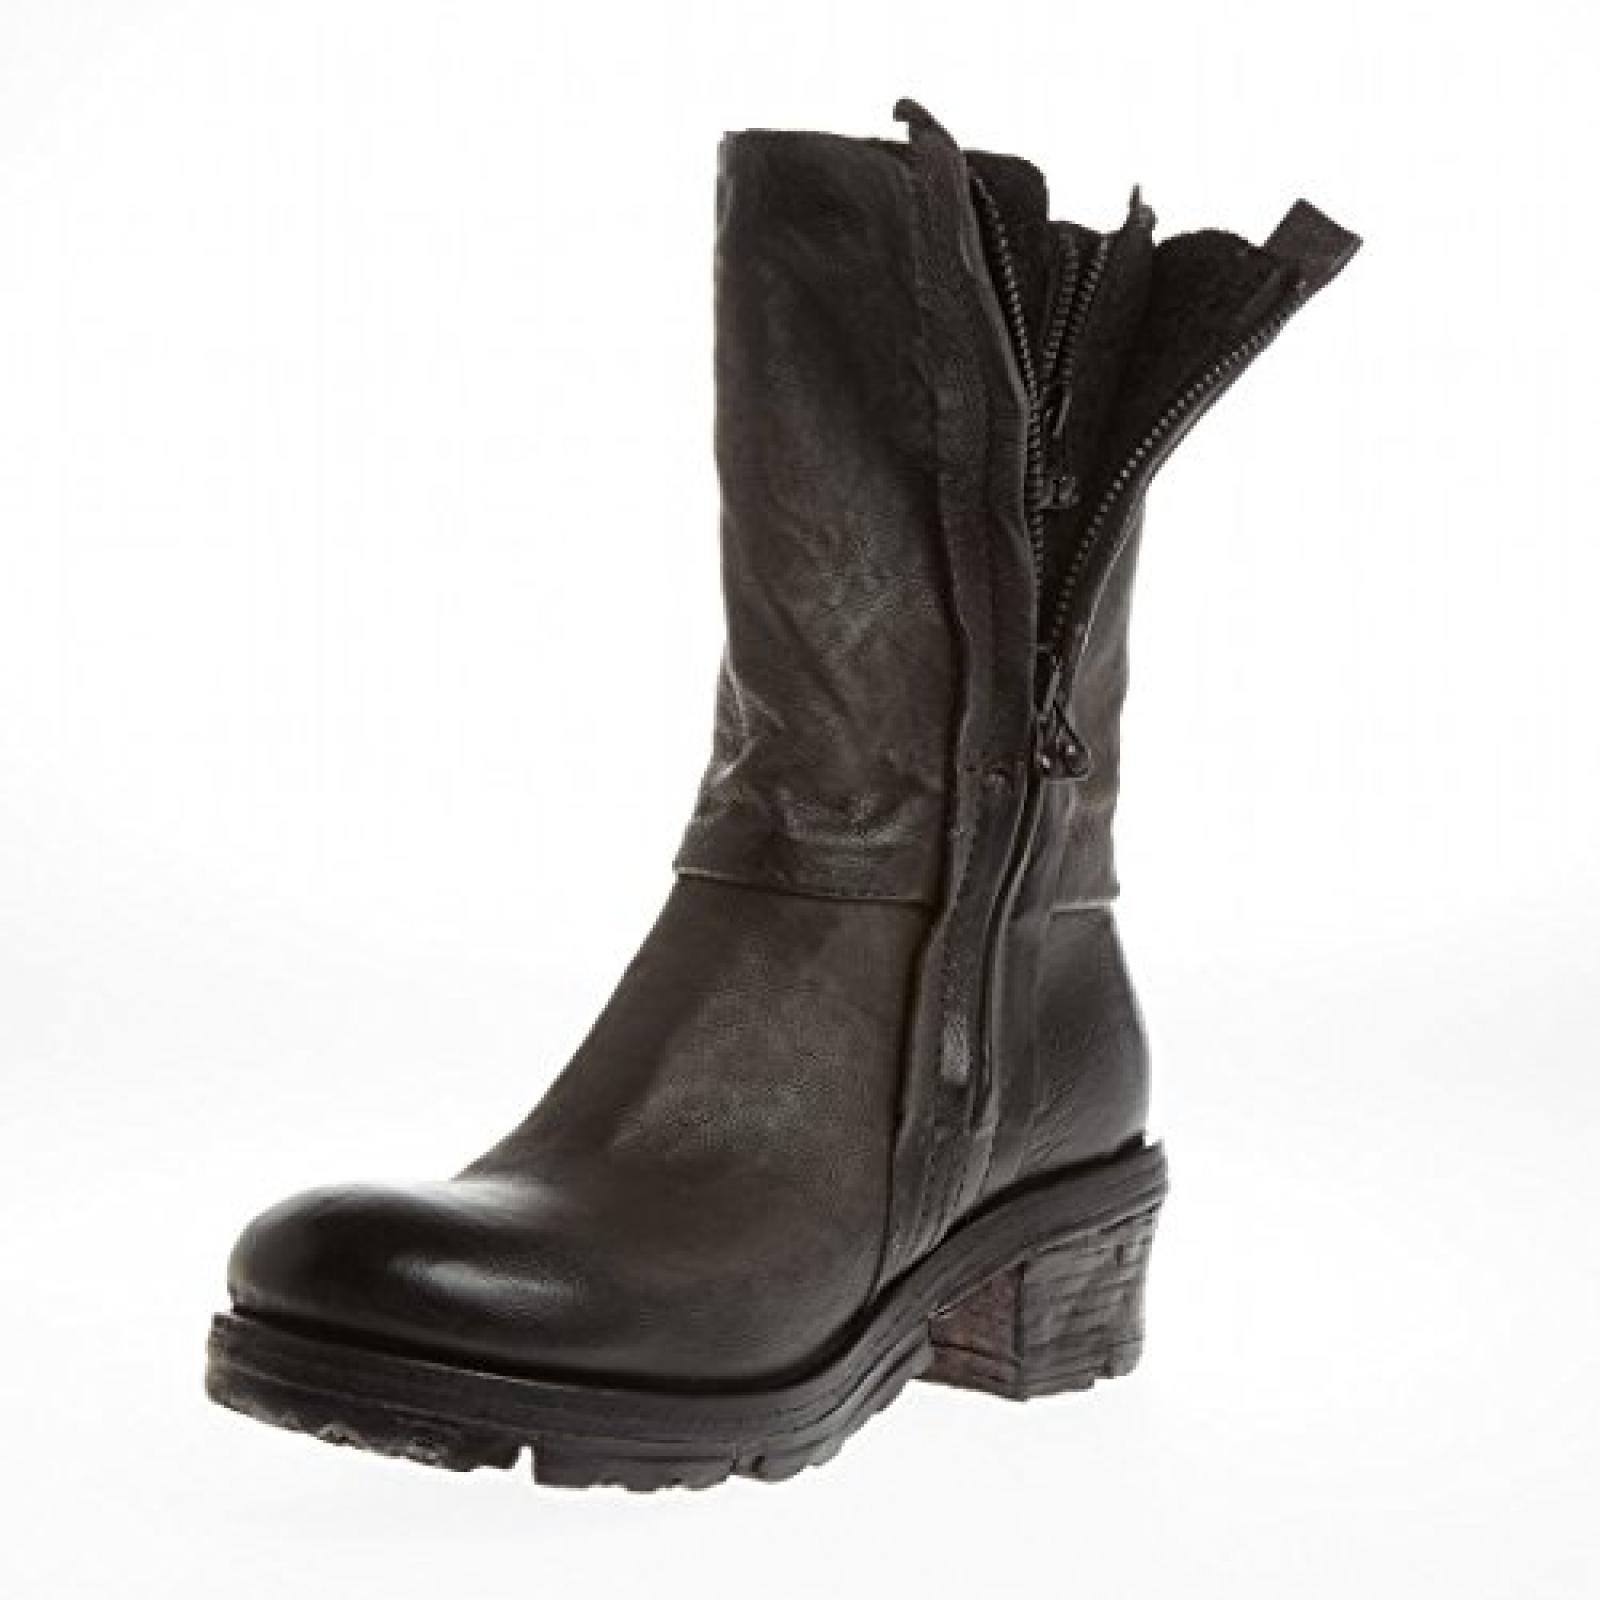 A.S.98 Boots Electra 699203-3500-6002 nero 